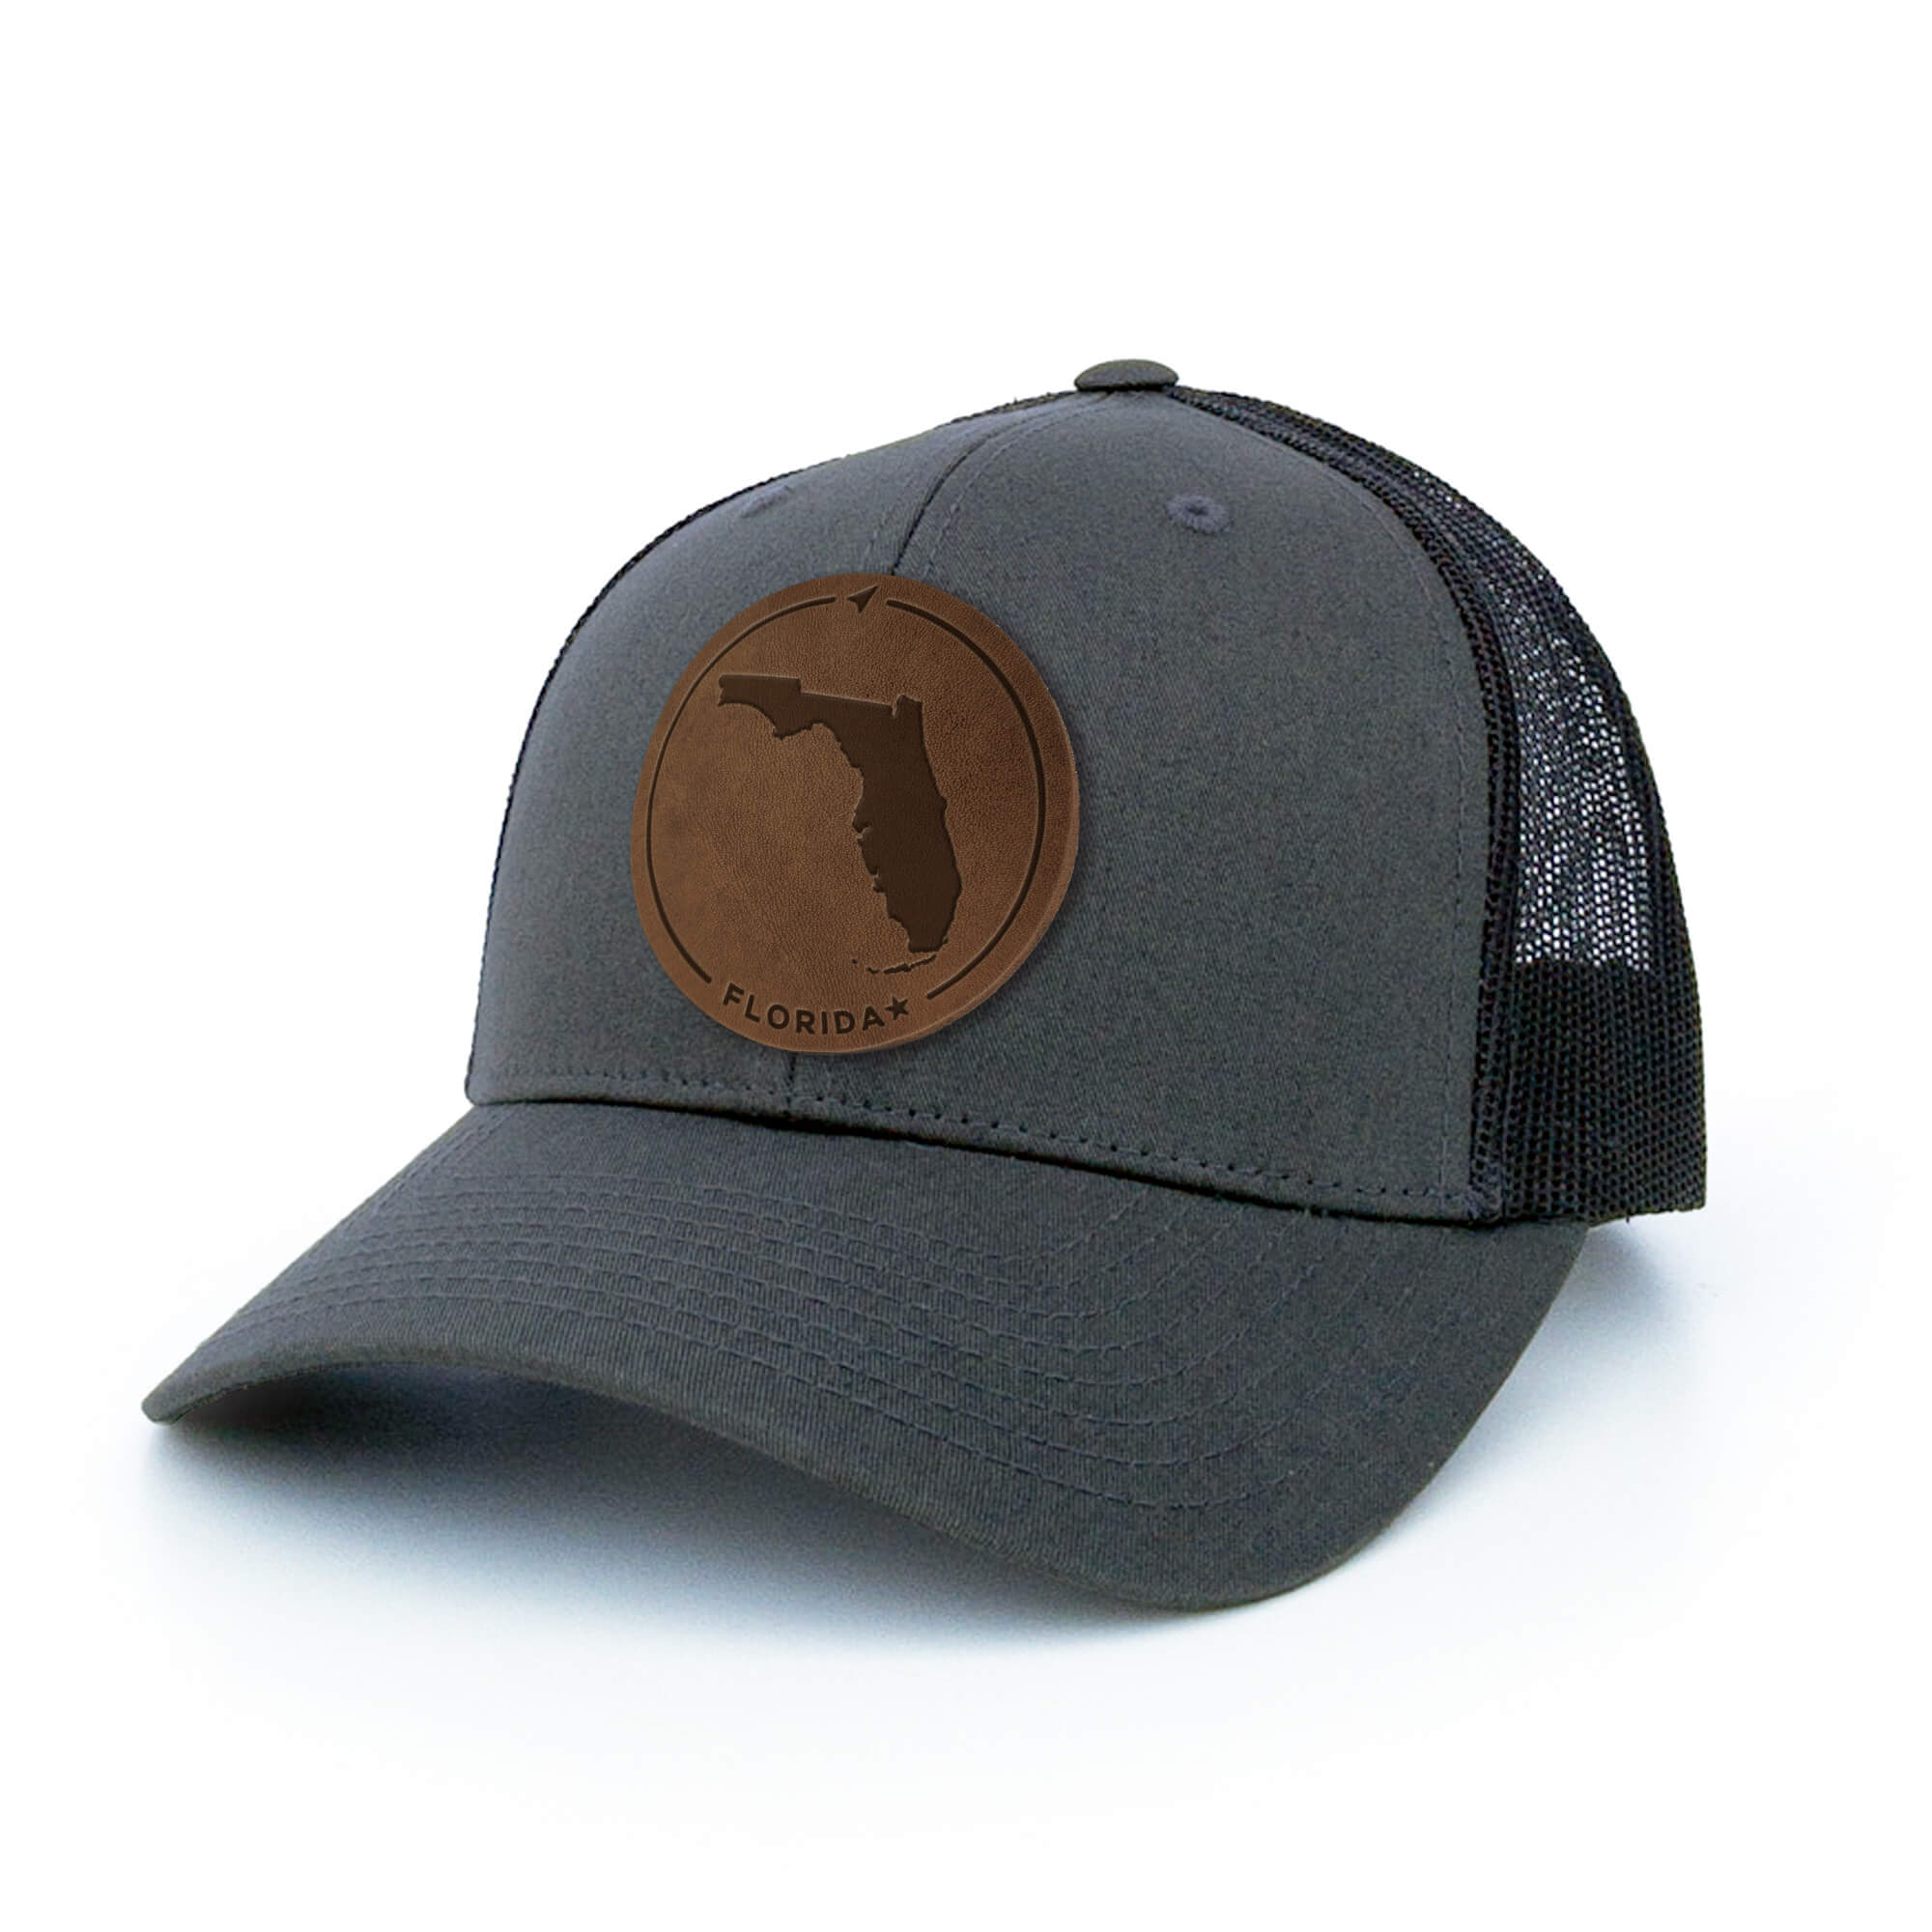 Charcoal trucker hat with full-grain leather patch of Florida | BLACK-003-010, CHARC-003-010, NAVY-003-010, HGREY-003-010, MOSS-003-010, BROWN-003-010